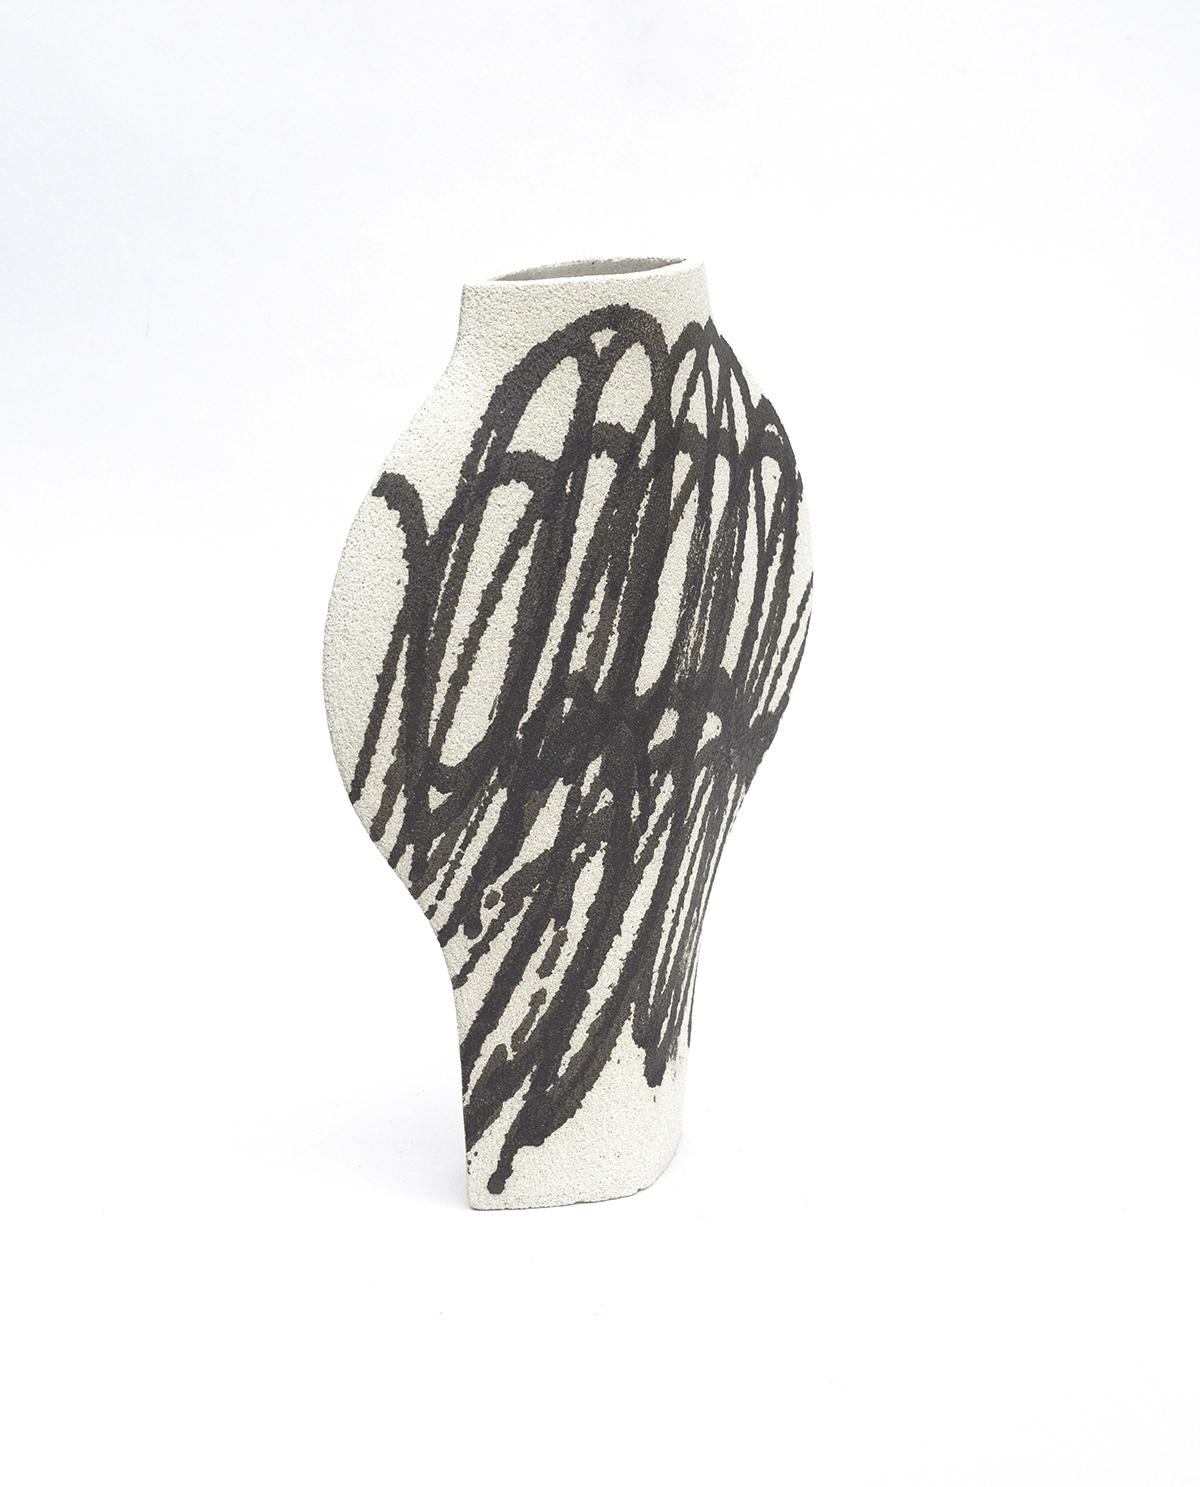 ‘Dal Circles Black’ ceramic vase 

This vase is part of a new series inspired by iconic Art (and more precisely paintings) movements. Here is our DAL model with motifs based on abstract paintings. They are applied to the vase before its first